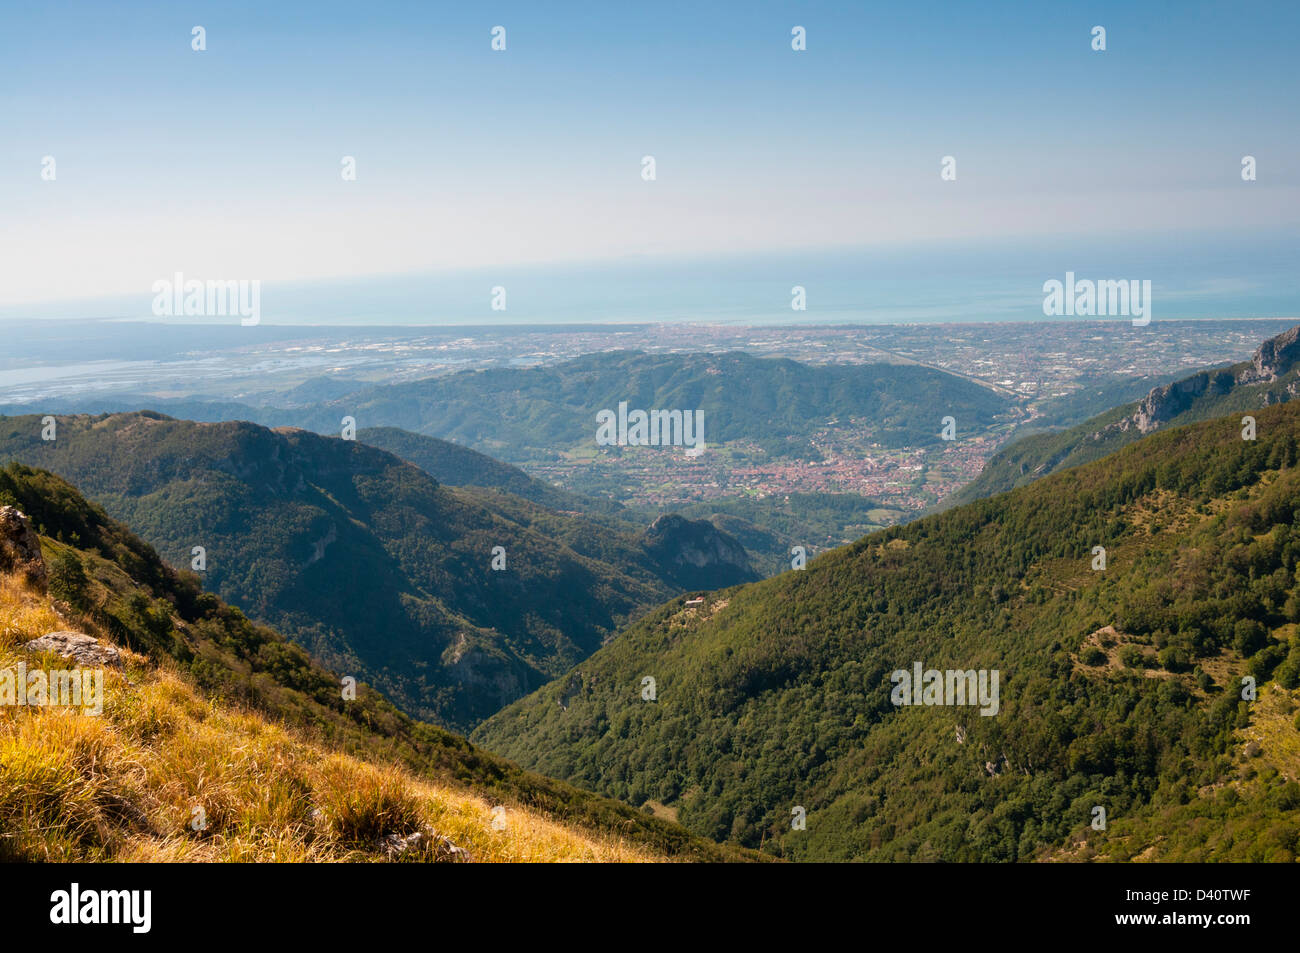 View of Camaiore city and Tyrrhenian sea from Apuan Alps (Alpi Apuane), Lucca Province, Tuscany, Italy Stock Photo